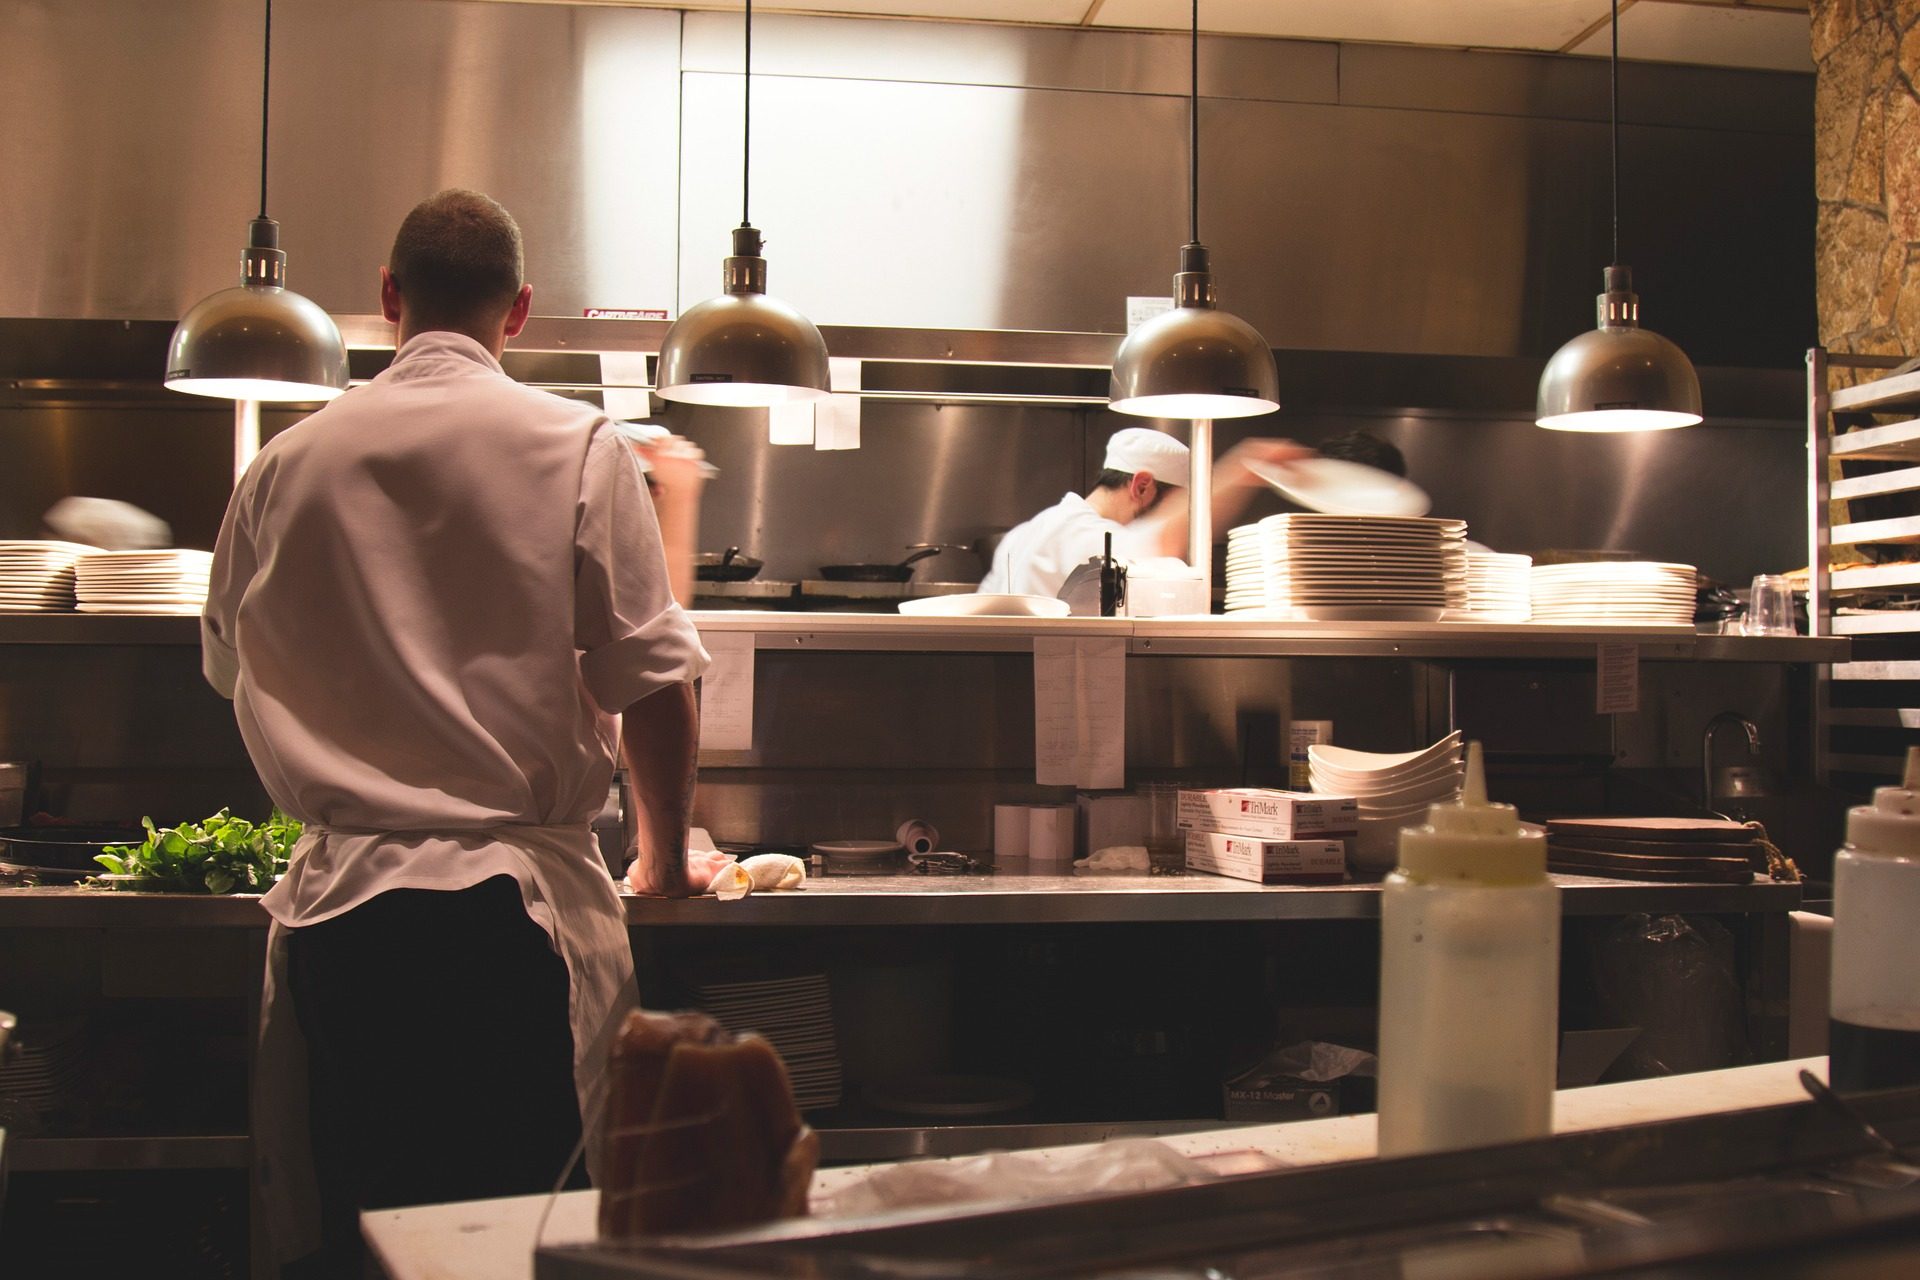 5 Invaluable Lessons Chefs Can Teach Us About Life